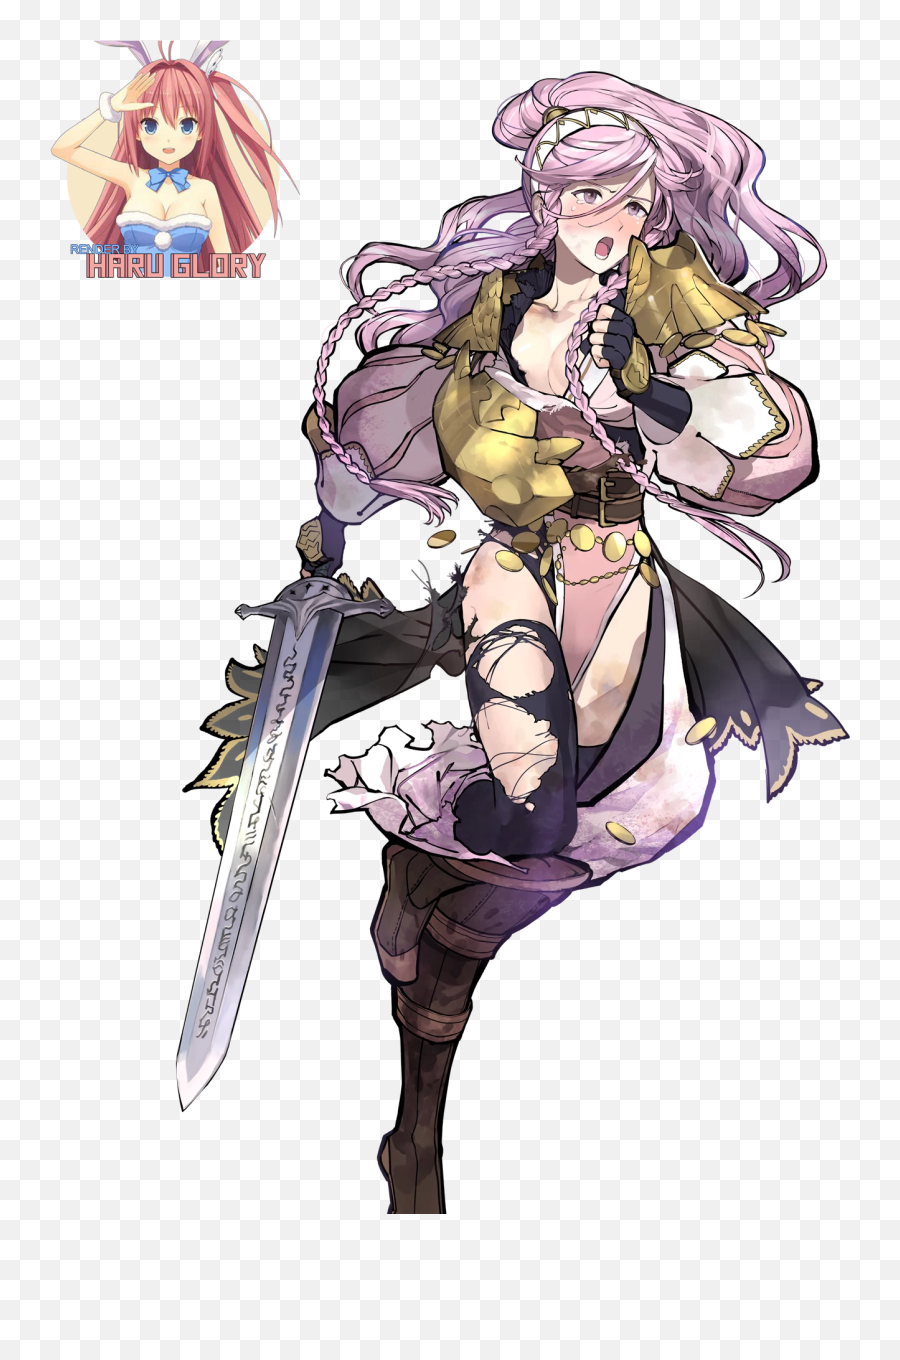 Olivia 12 - Artwork Fire Emblem Echoes Png,Varian Wrynn Overwatch Icon